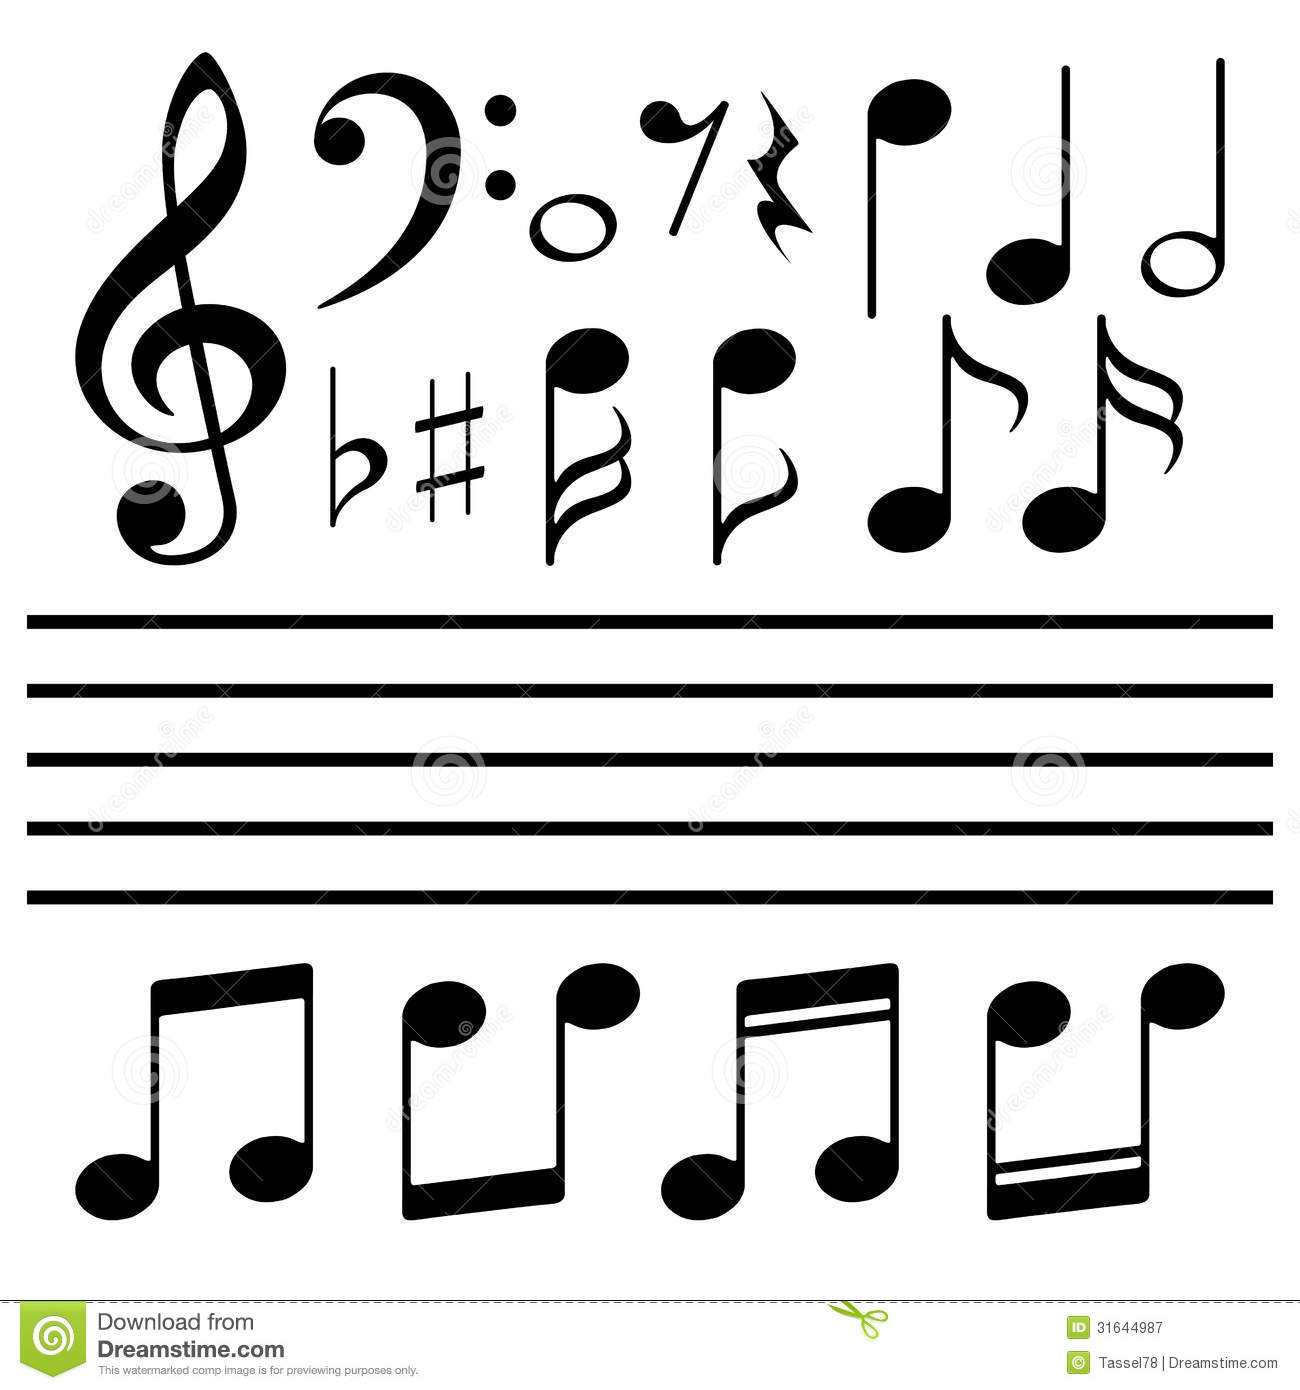 vector-music-notes-free-download-at-vectorified-collection-of